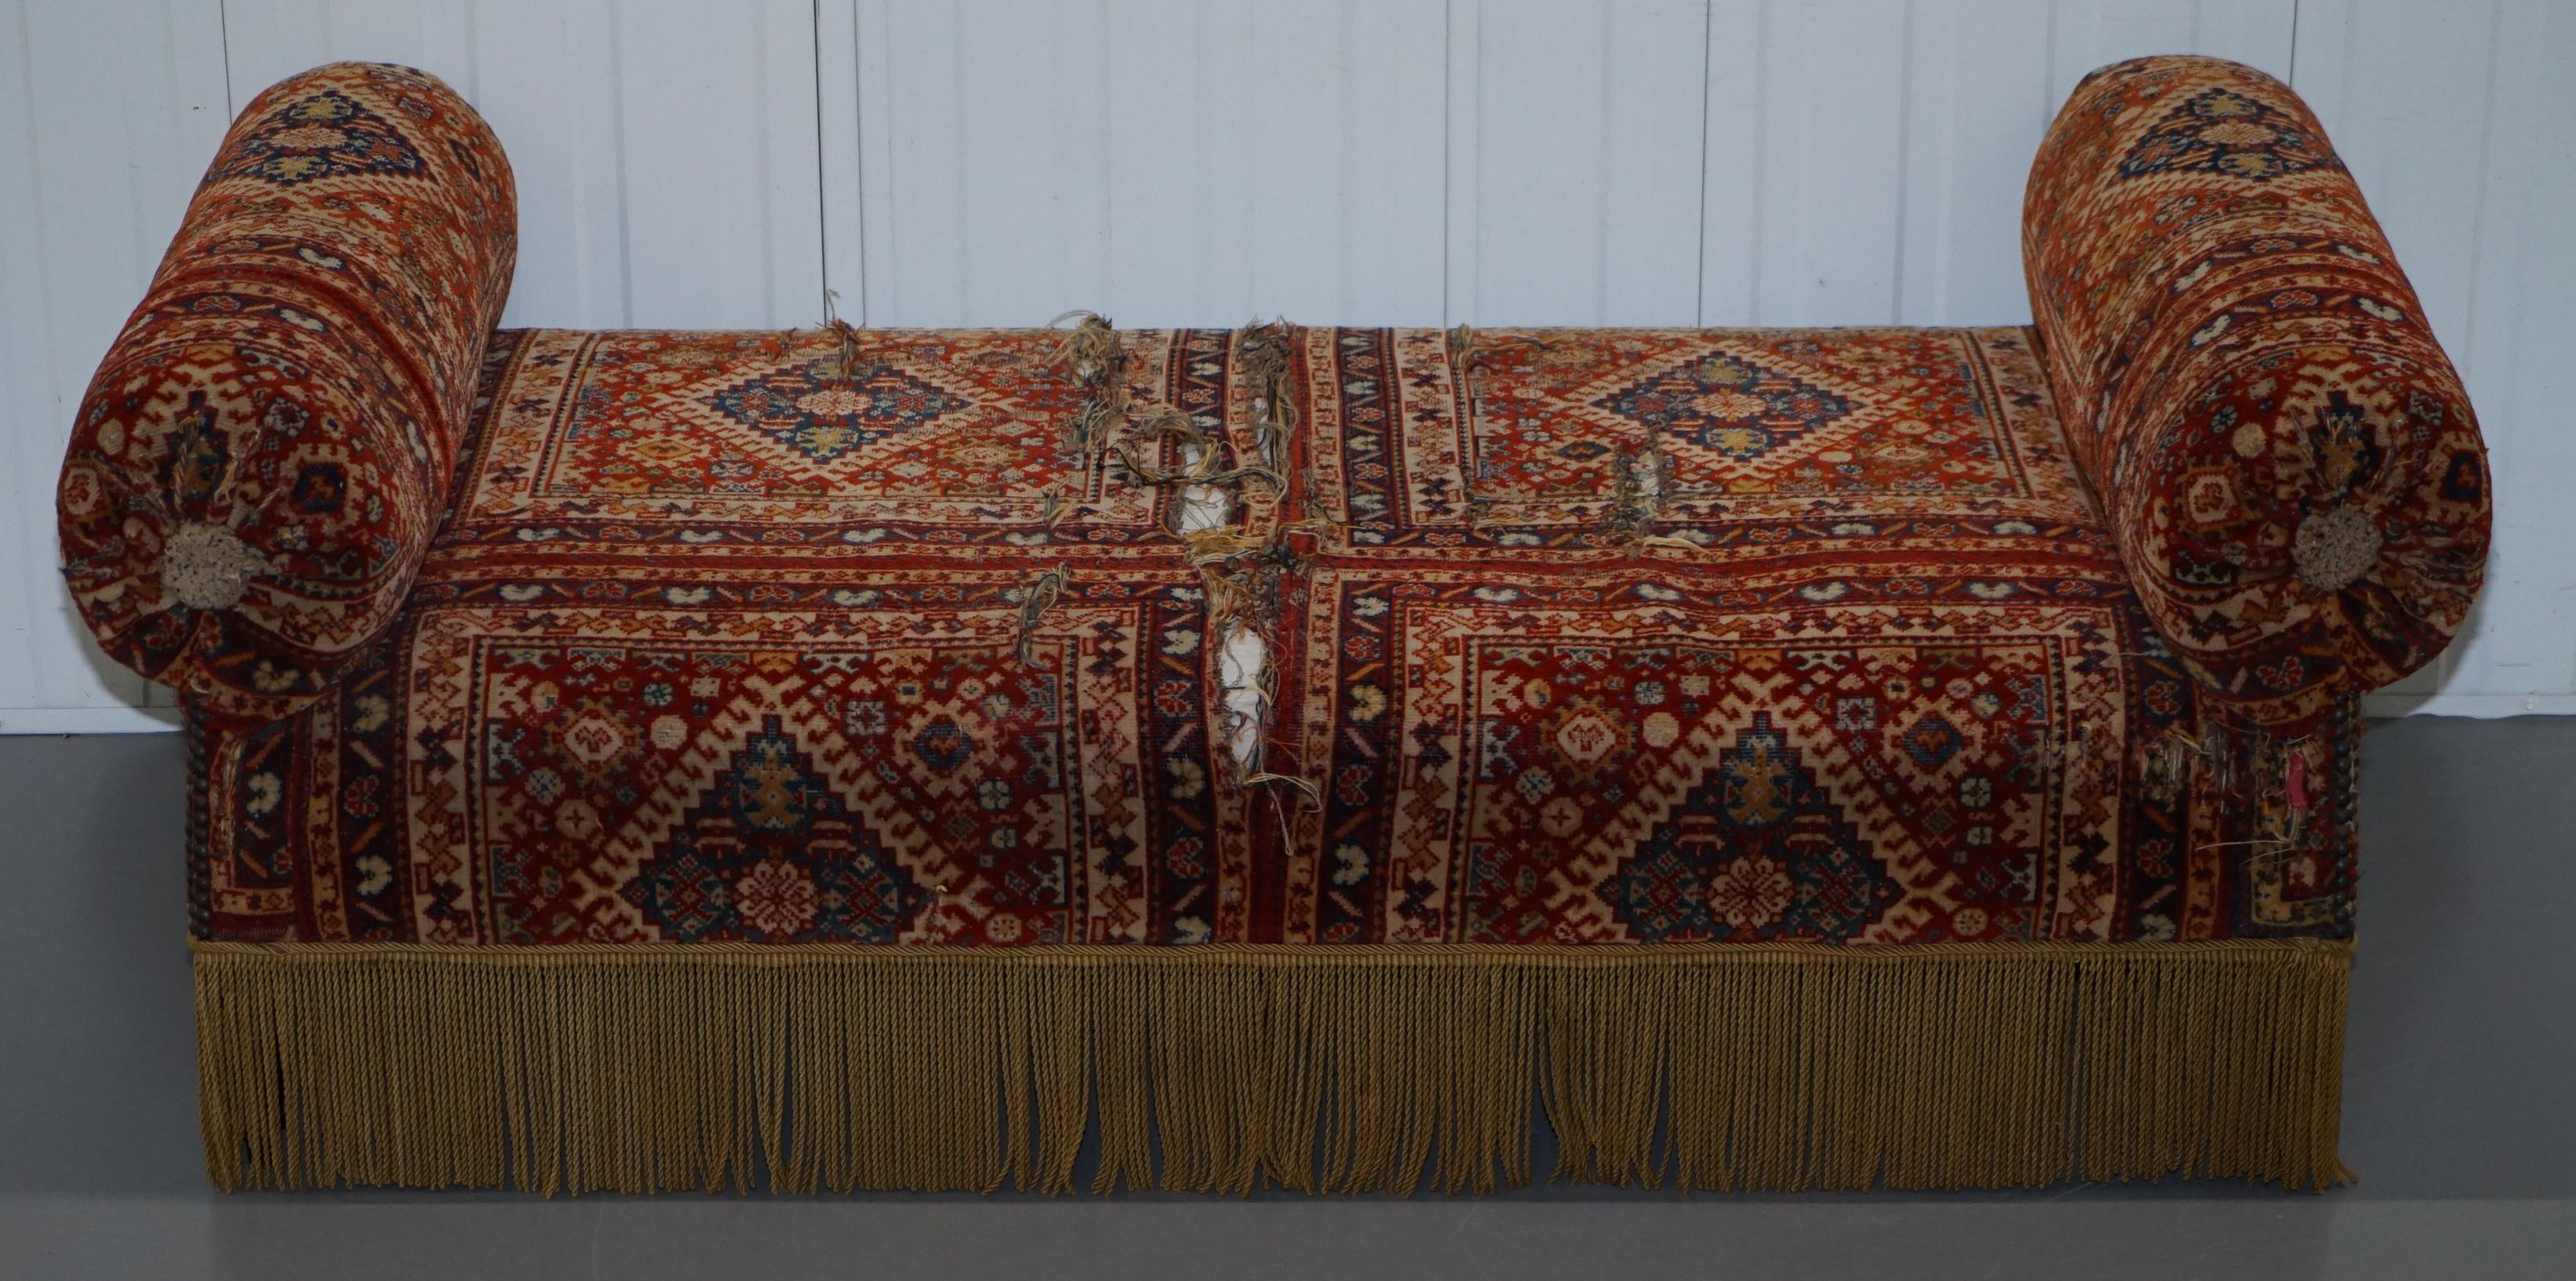 We are delighted to offer for sale this stunning and very rare circa 1810-1820 Regency Turkey work day bed with original period upholstery

A very rare well made and decorative piece of furniture. Turkey work is a form of knotted embroidery